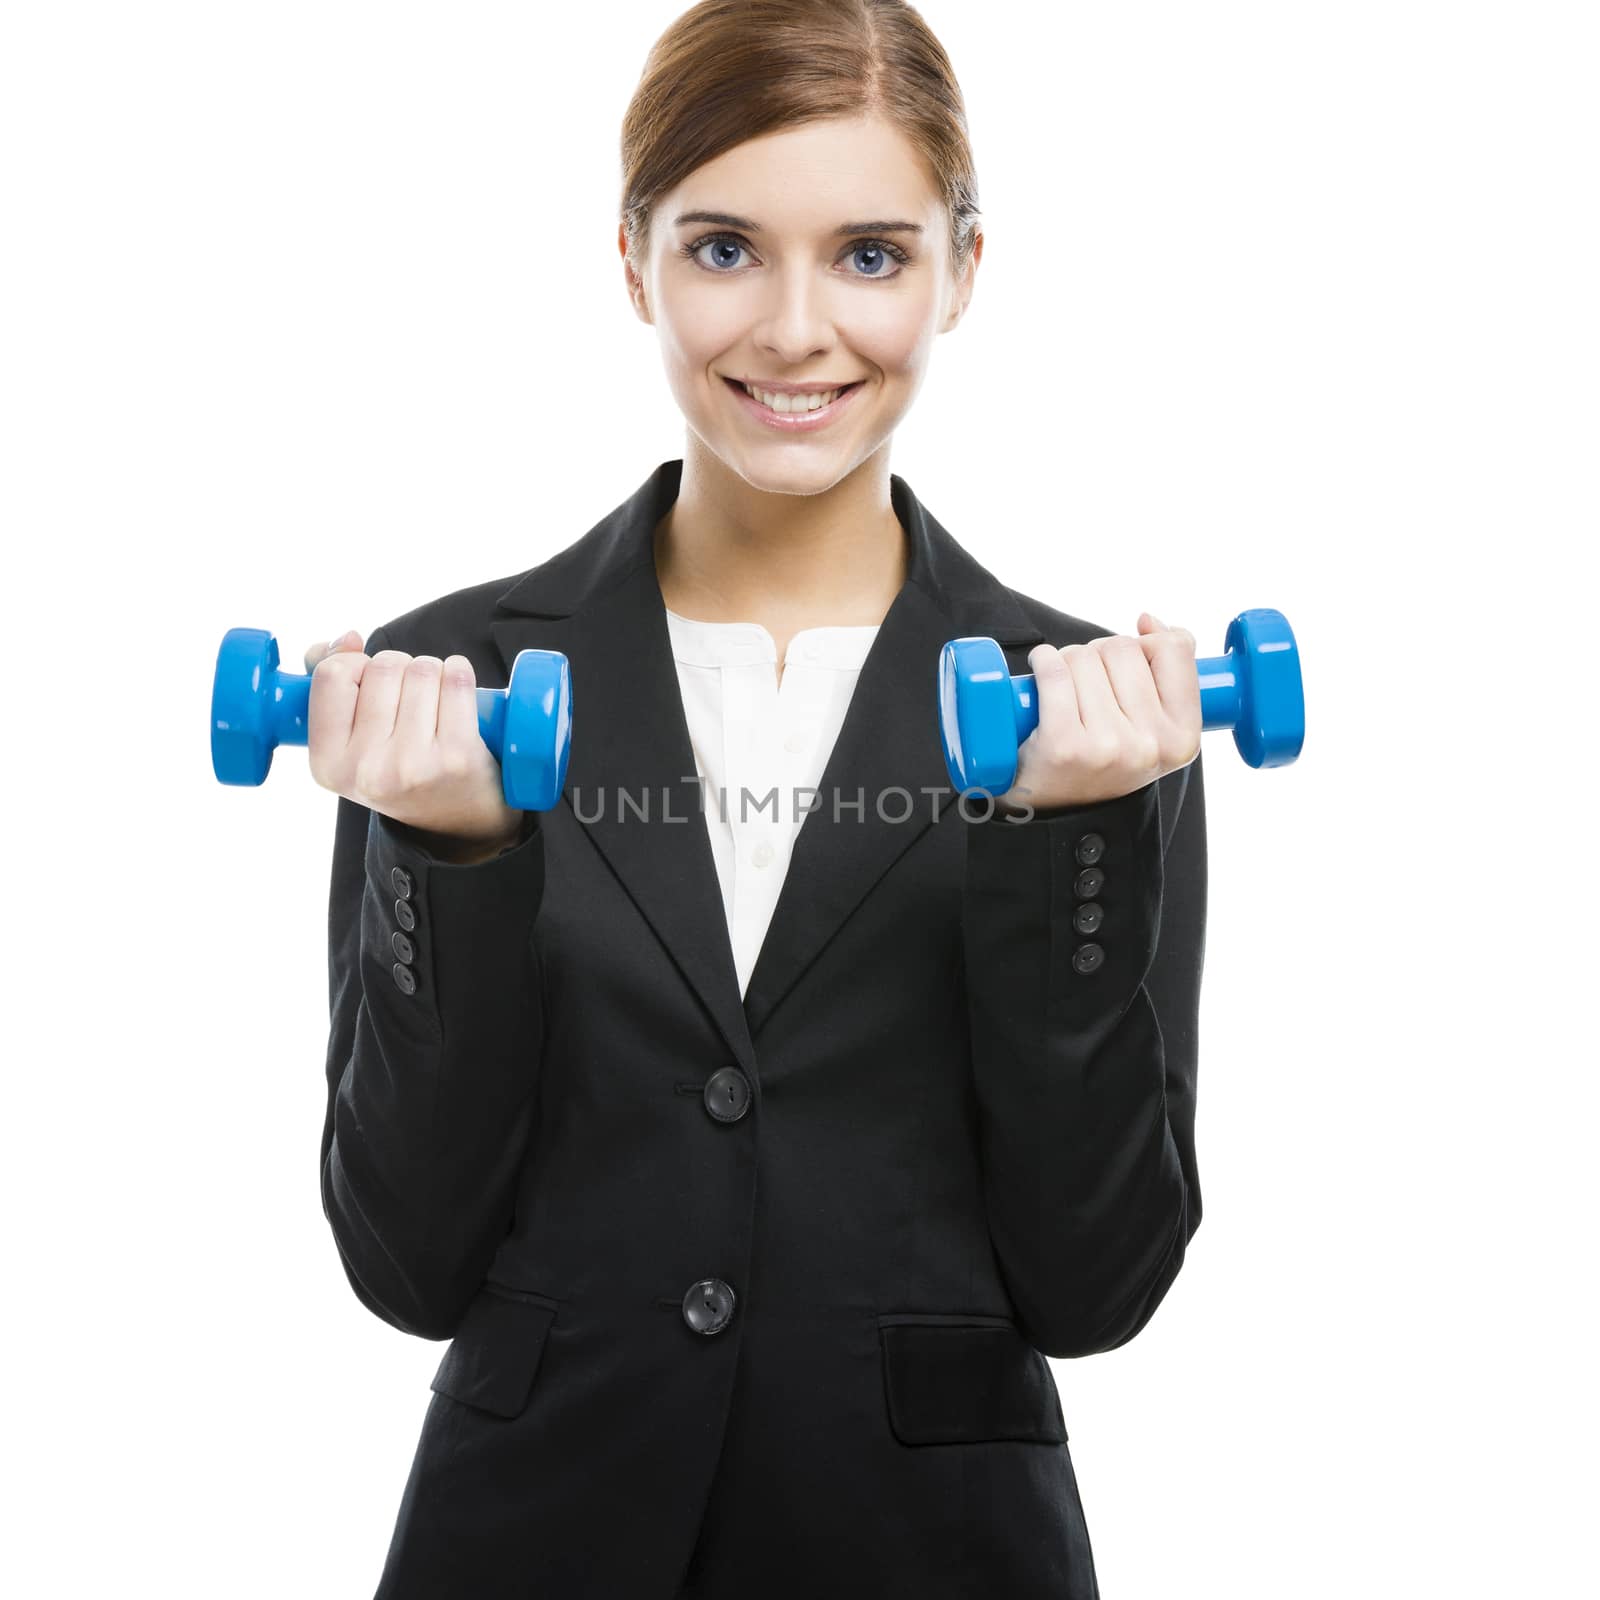 Business woman lifting weights by Iko